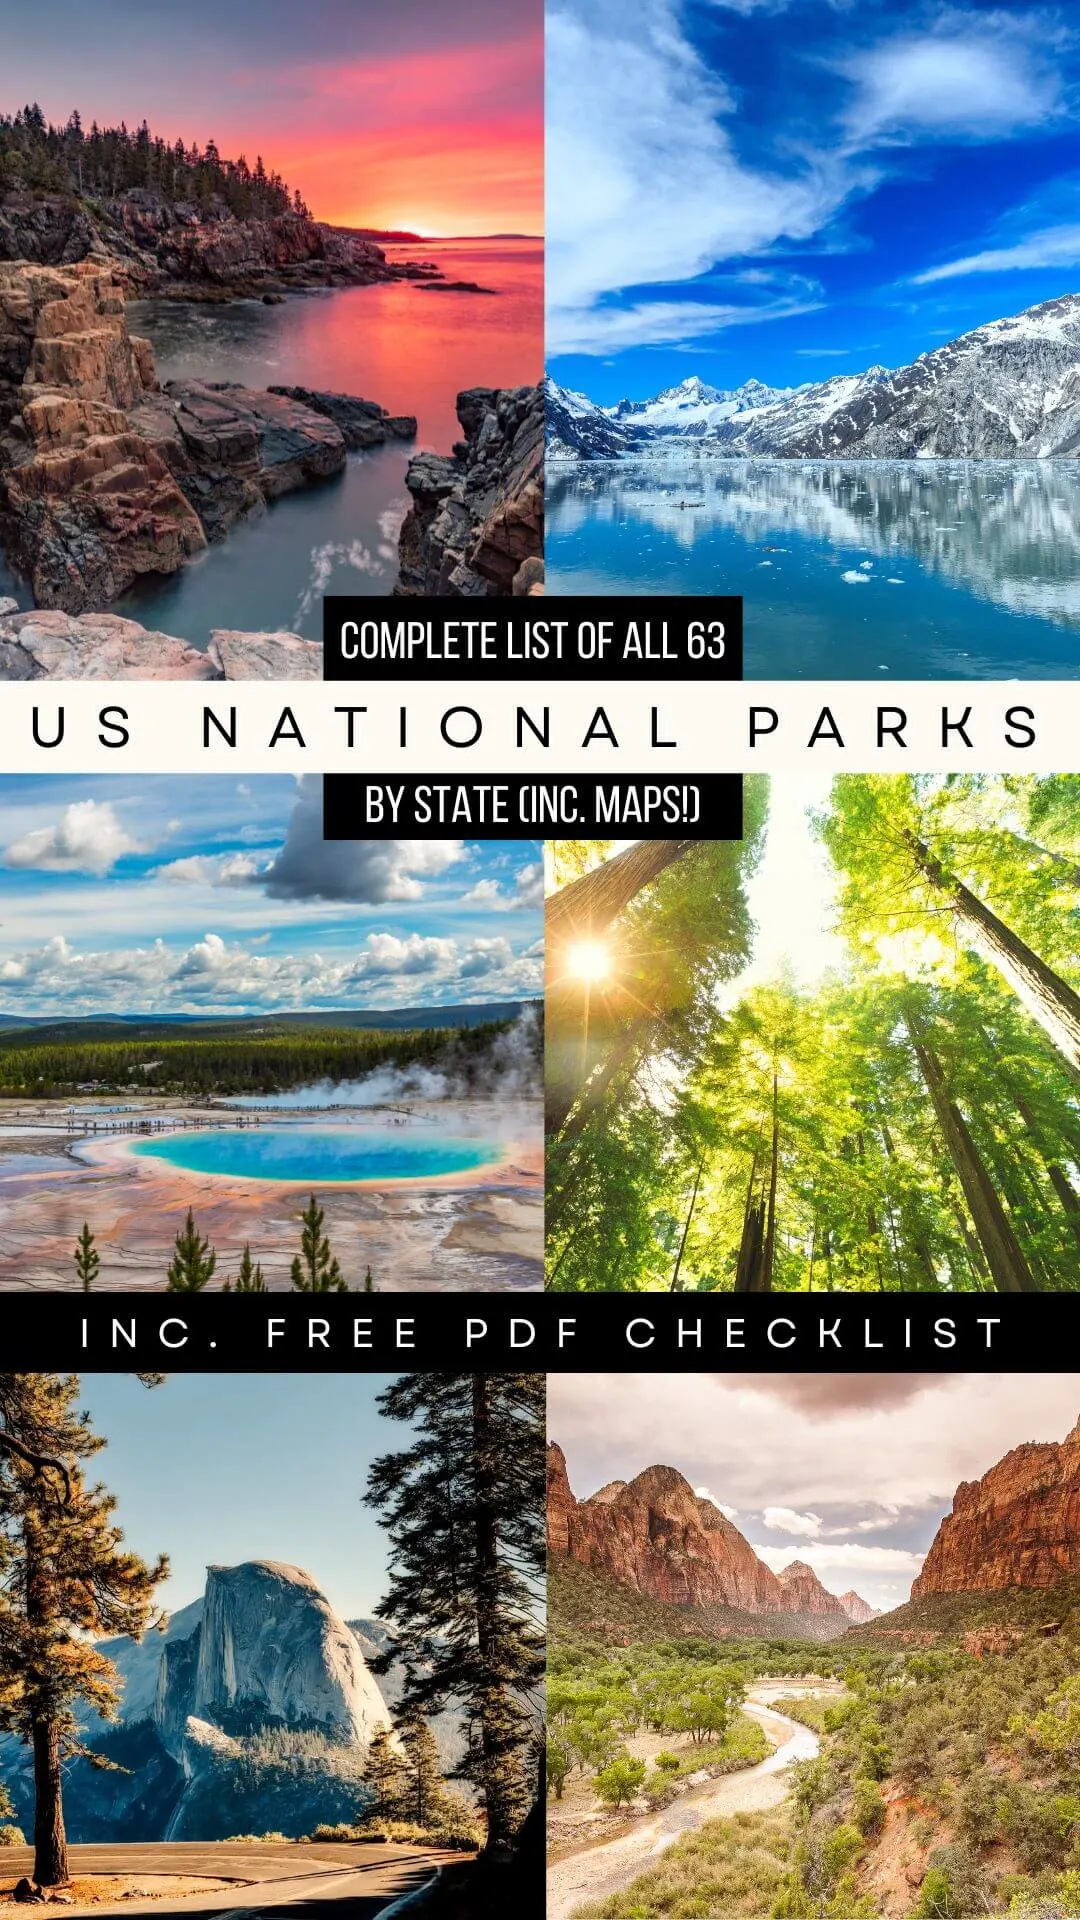 Complete List of US NATIONAL PARKS Pin Image